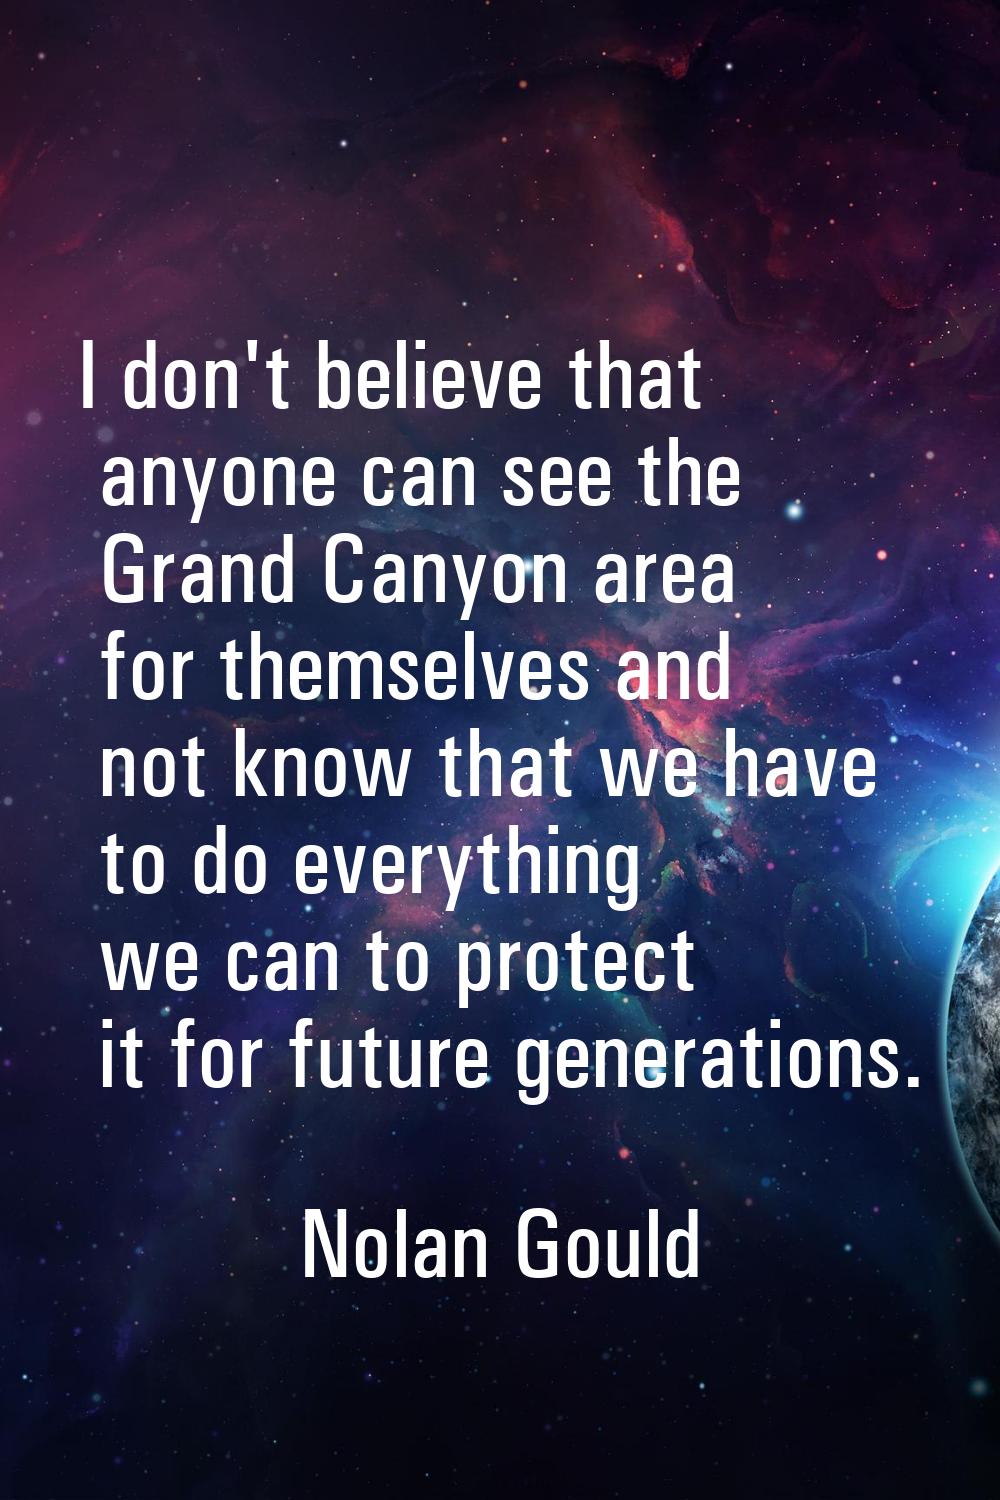 I don't believe that anyone can see the Grand Canyon area for themselves and not know that we have 